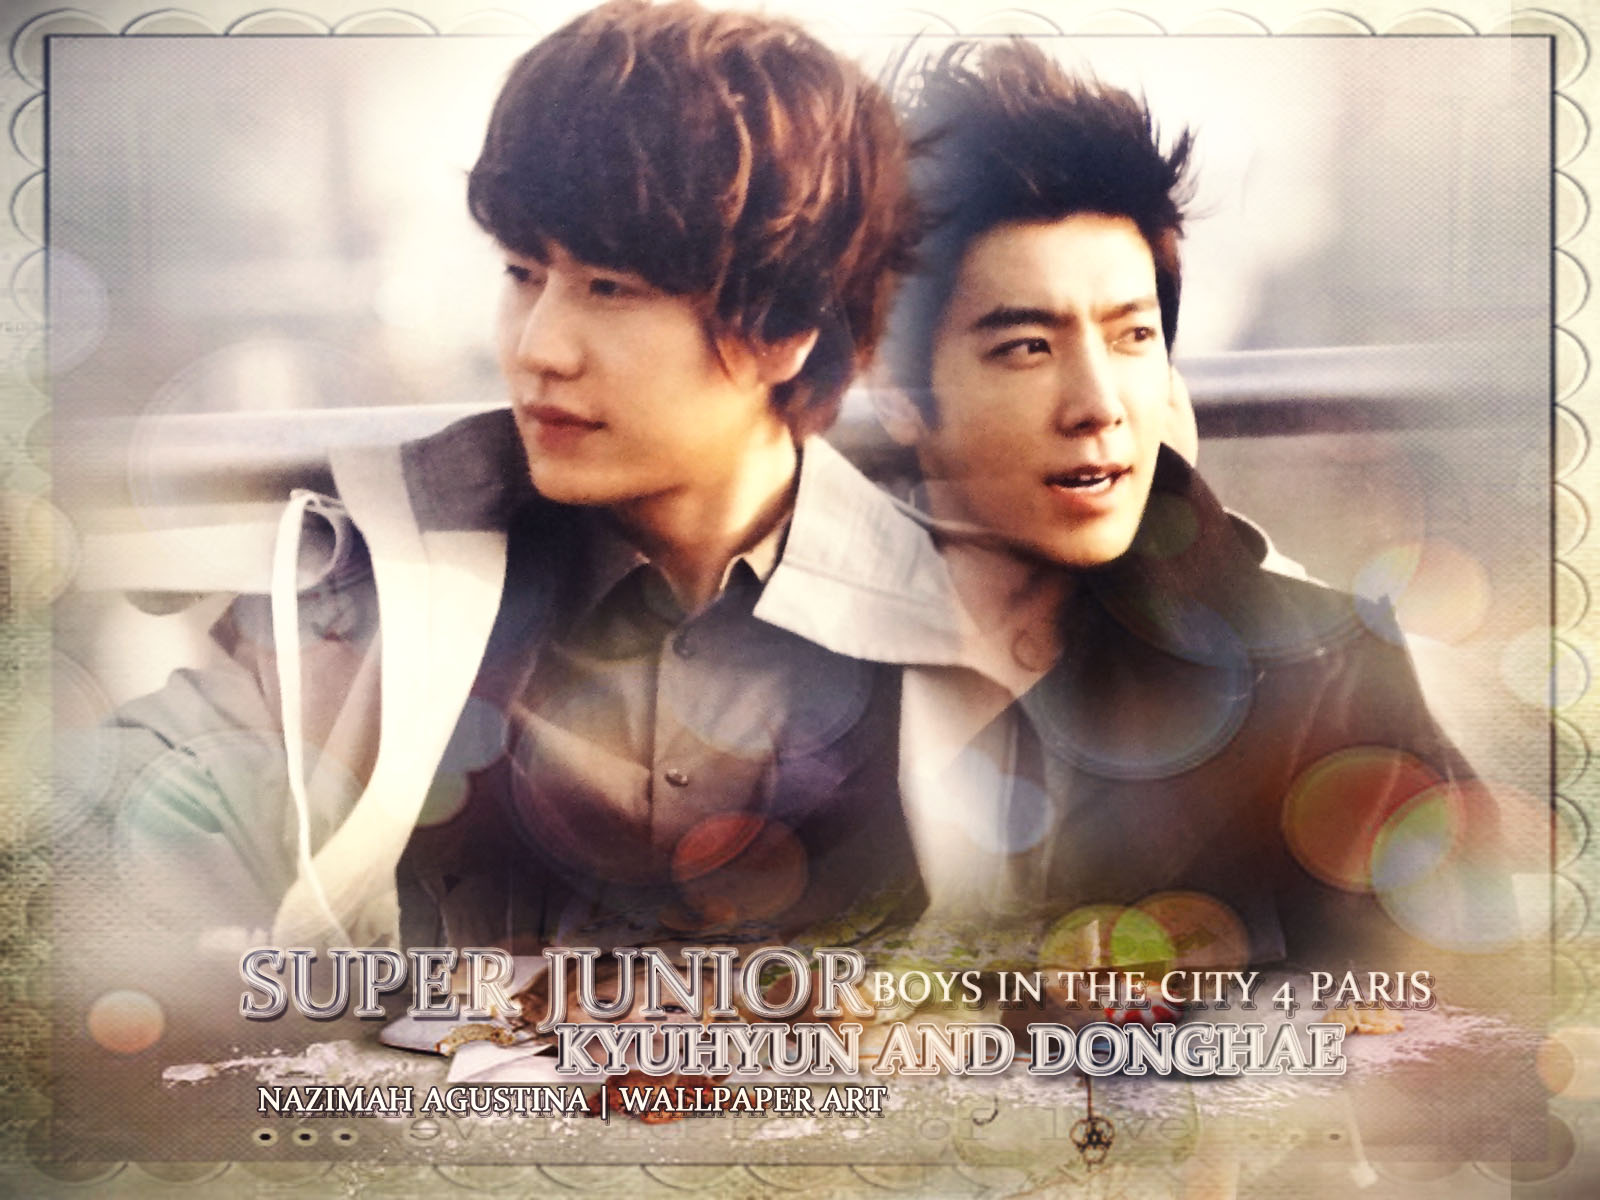 donghae wallpaper,movie,cool,forehead,poster,friendship